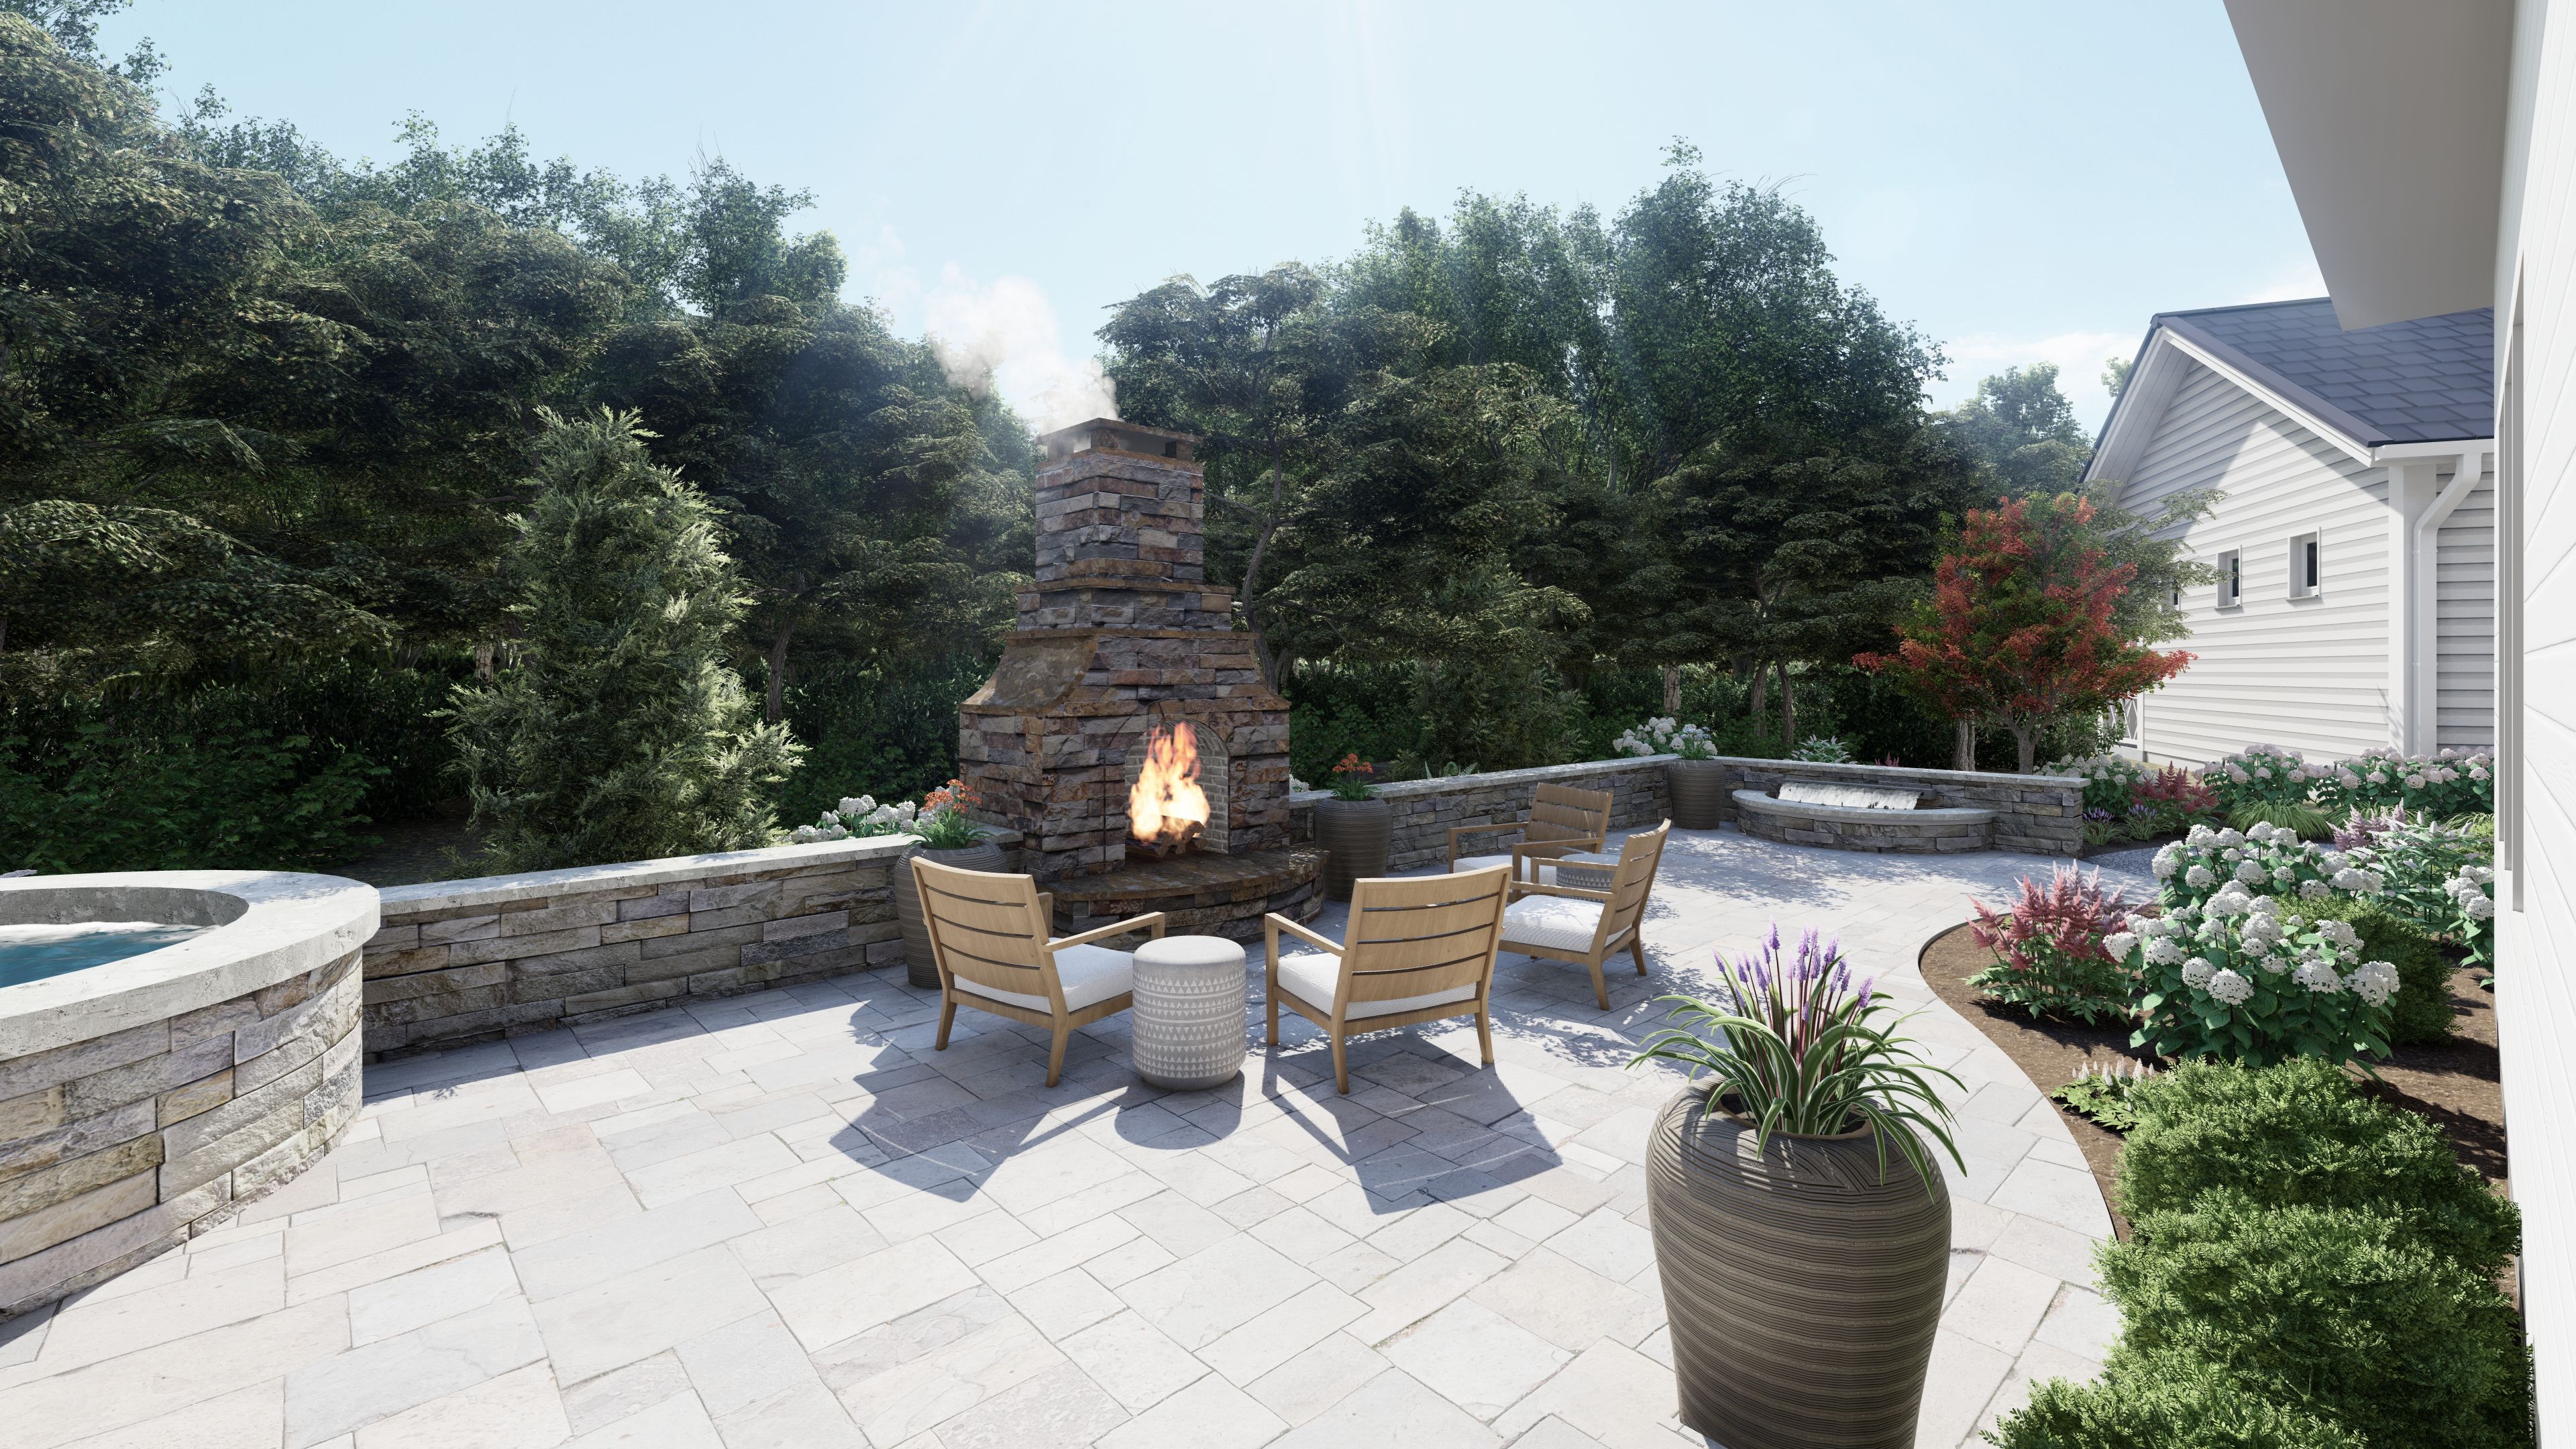 a stone patio in a backyard with an outdoor fire place and outdoor hot tub nestled among colorful flower beds and tall evergreens